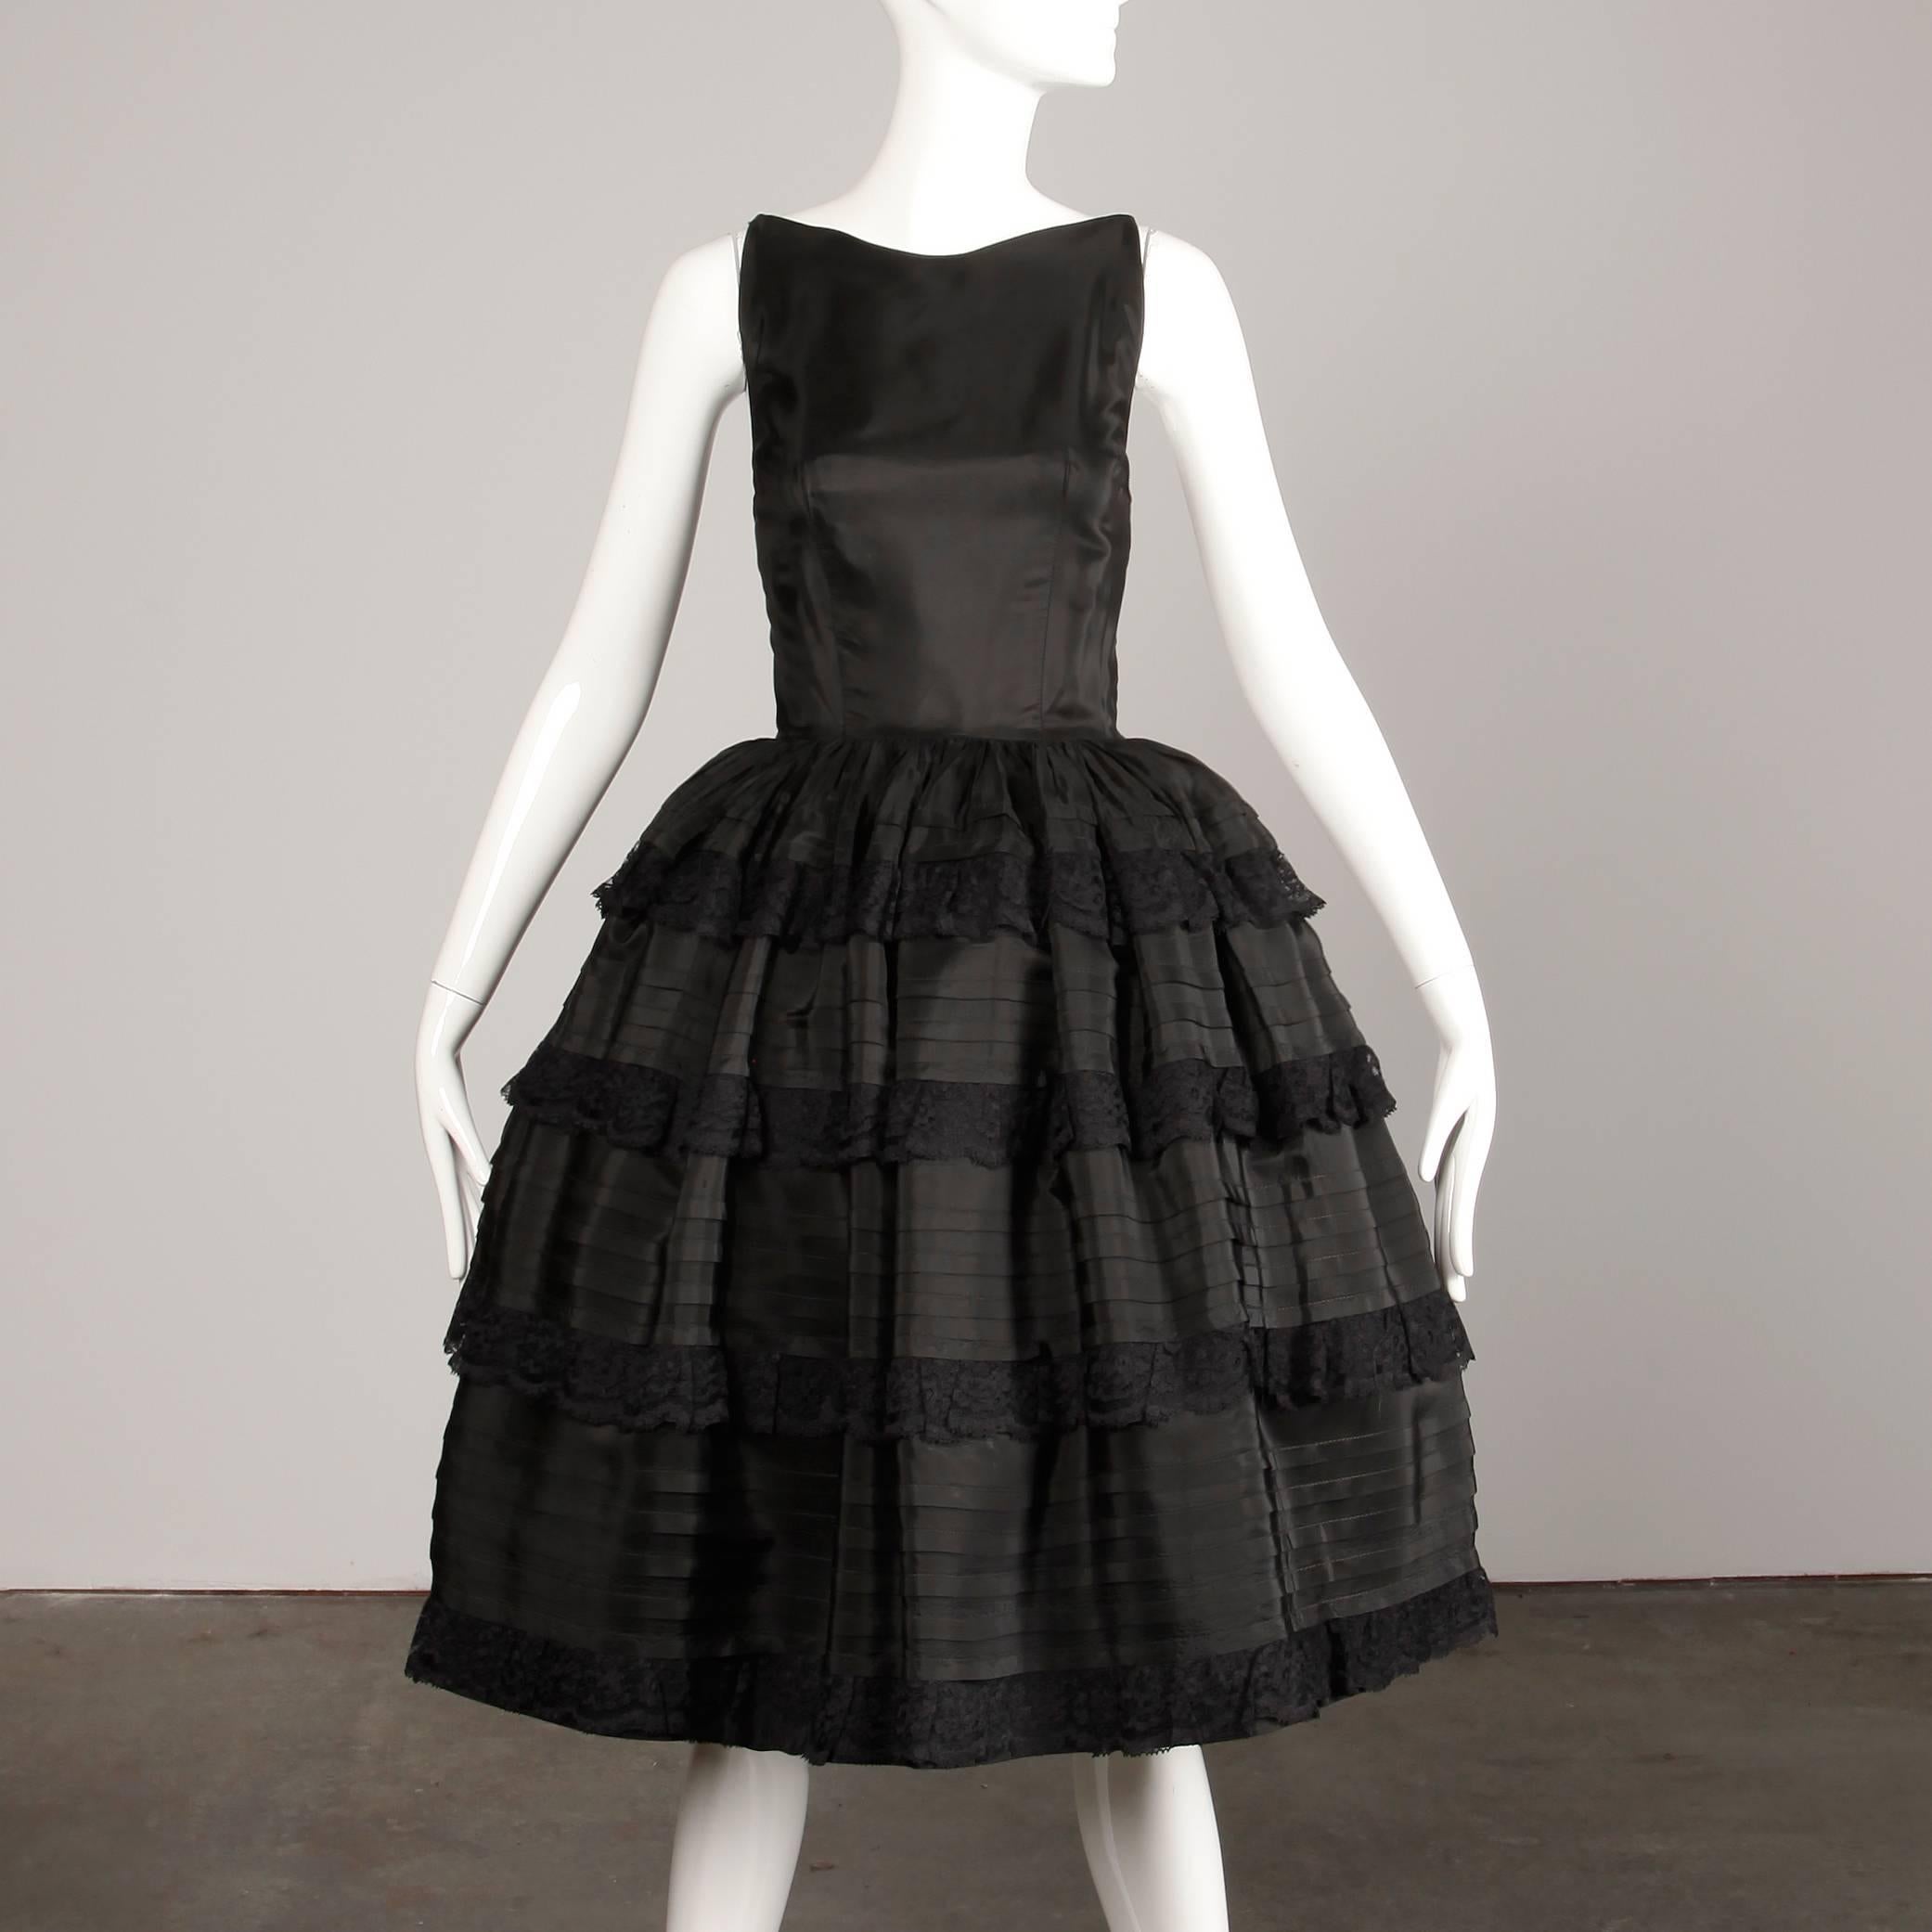 Elegant 1950s vintage black taffeta and lace cocktail dress with a scoop back and full tiered skirt. Partially lined with rear metal zip and hook closure. Fits like a modern size small. The bust measures 40", waist 26", hips free, and the